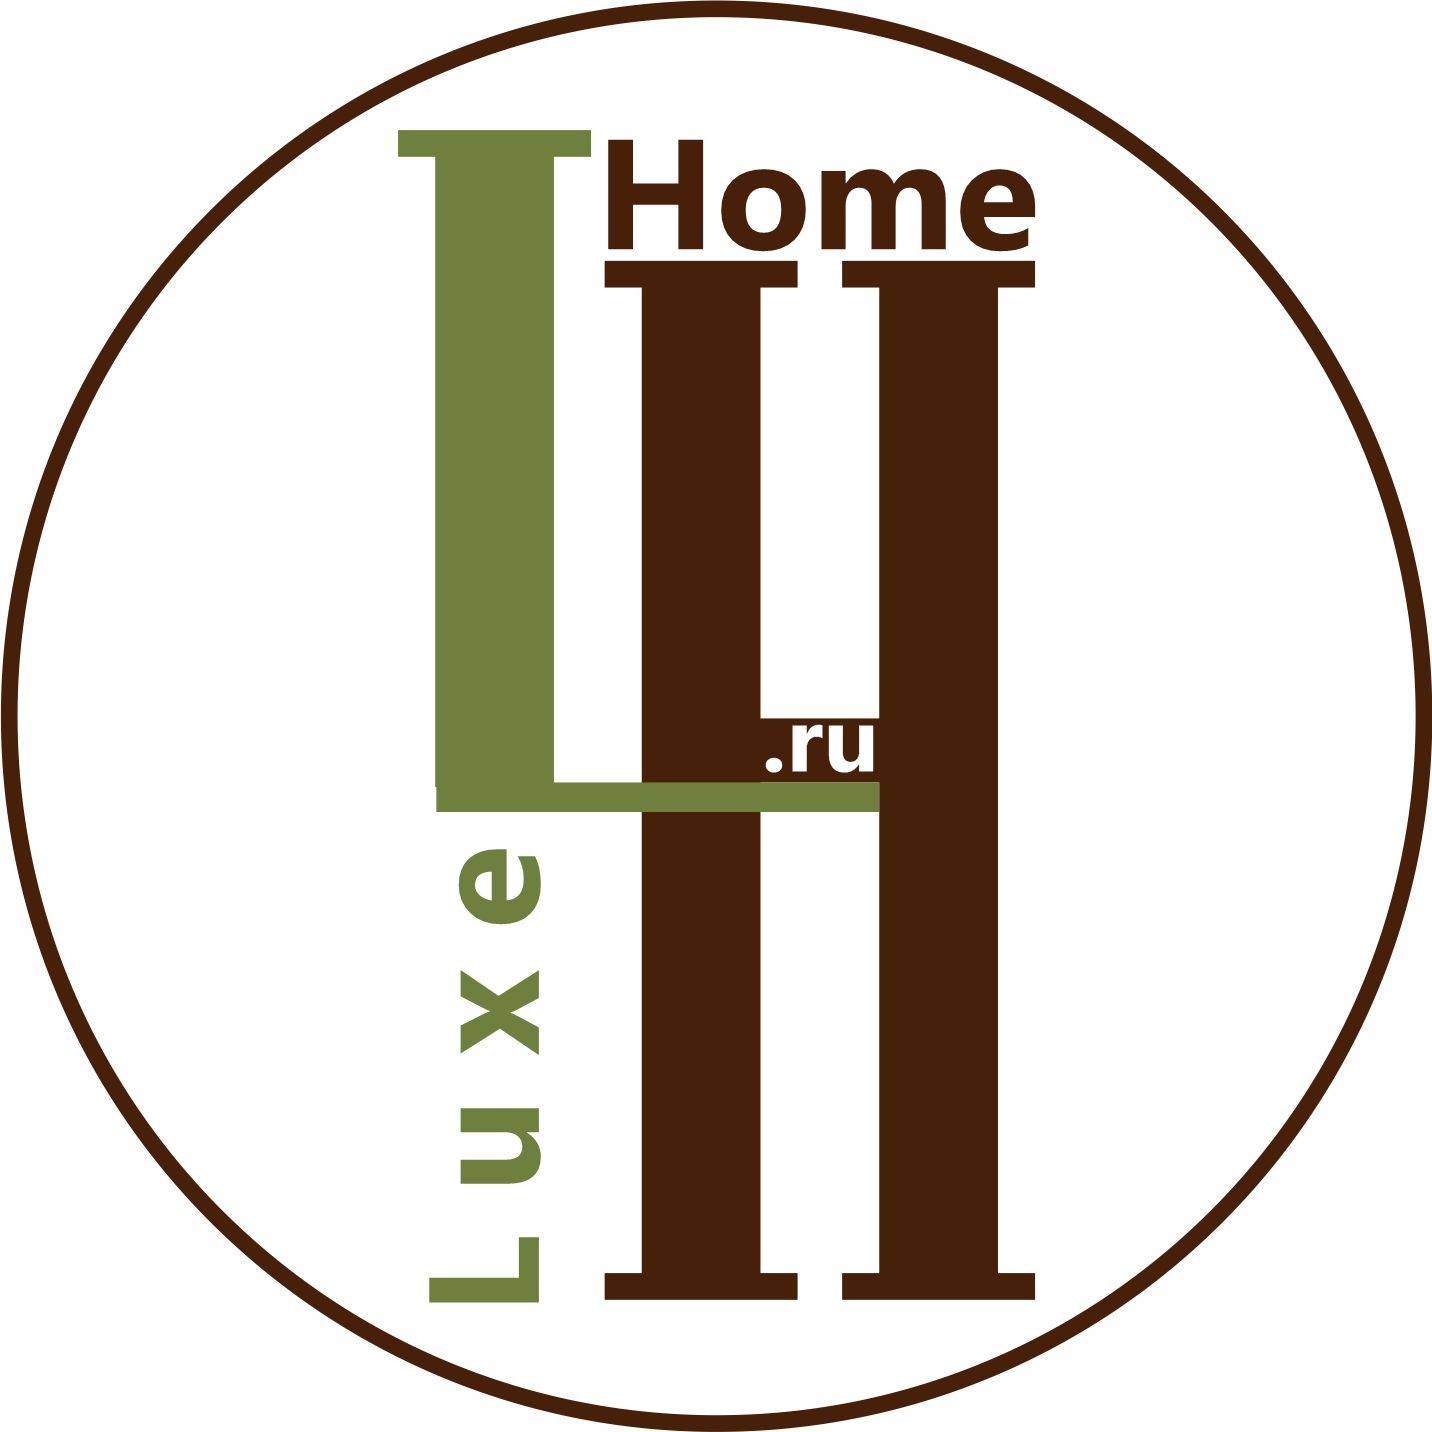 Luxe Home . ru